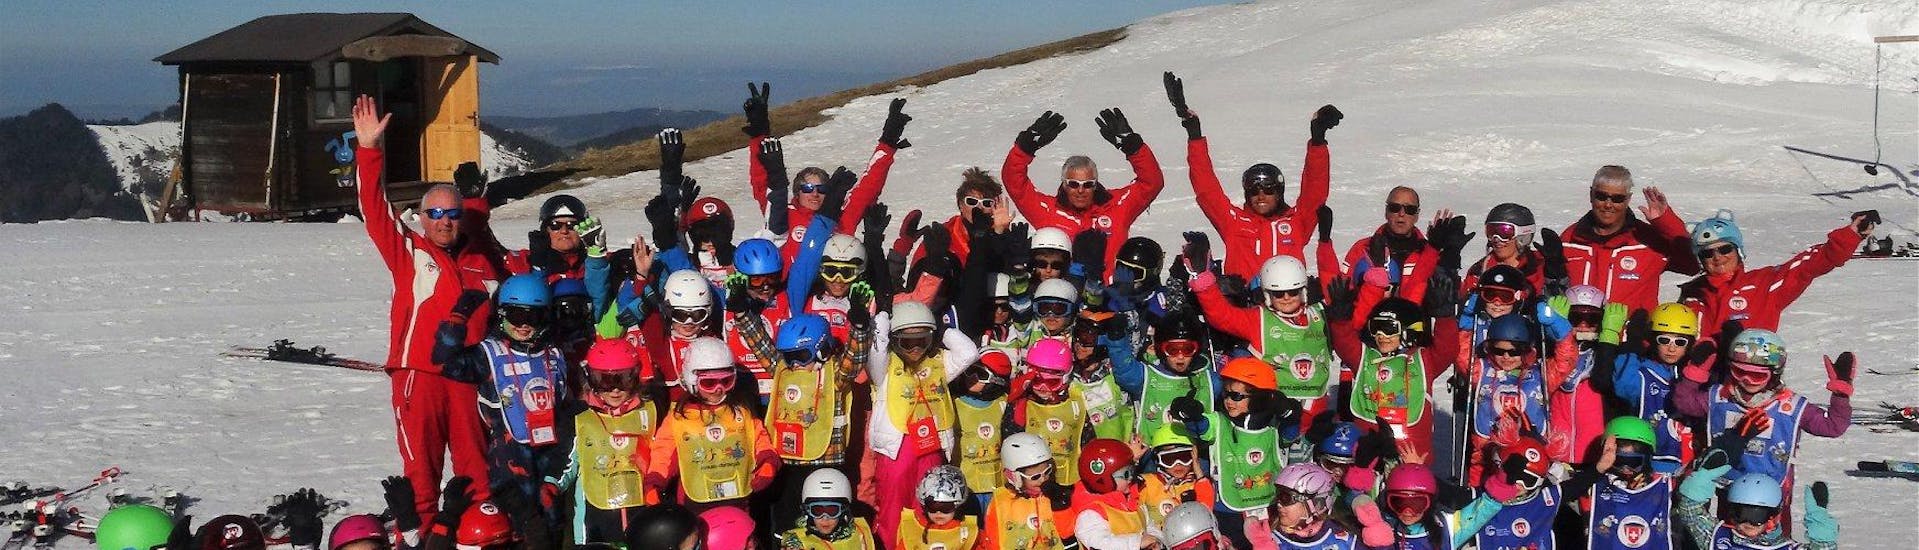 Students from the the swiss ski school Charmey and their ski instructors are gathered for a group photo celebrating their Kids Ski Lessons (6-15 years) - 4 lessons - All Levels.